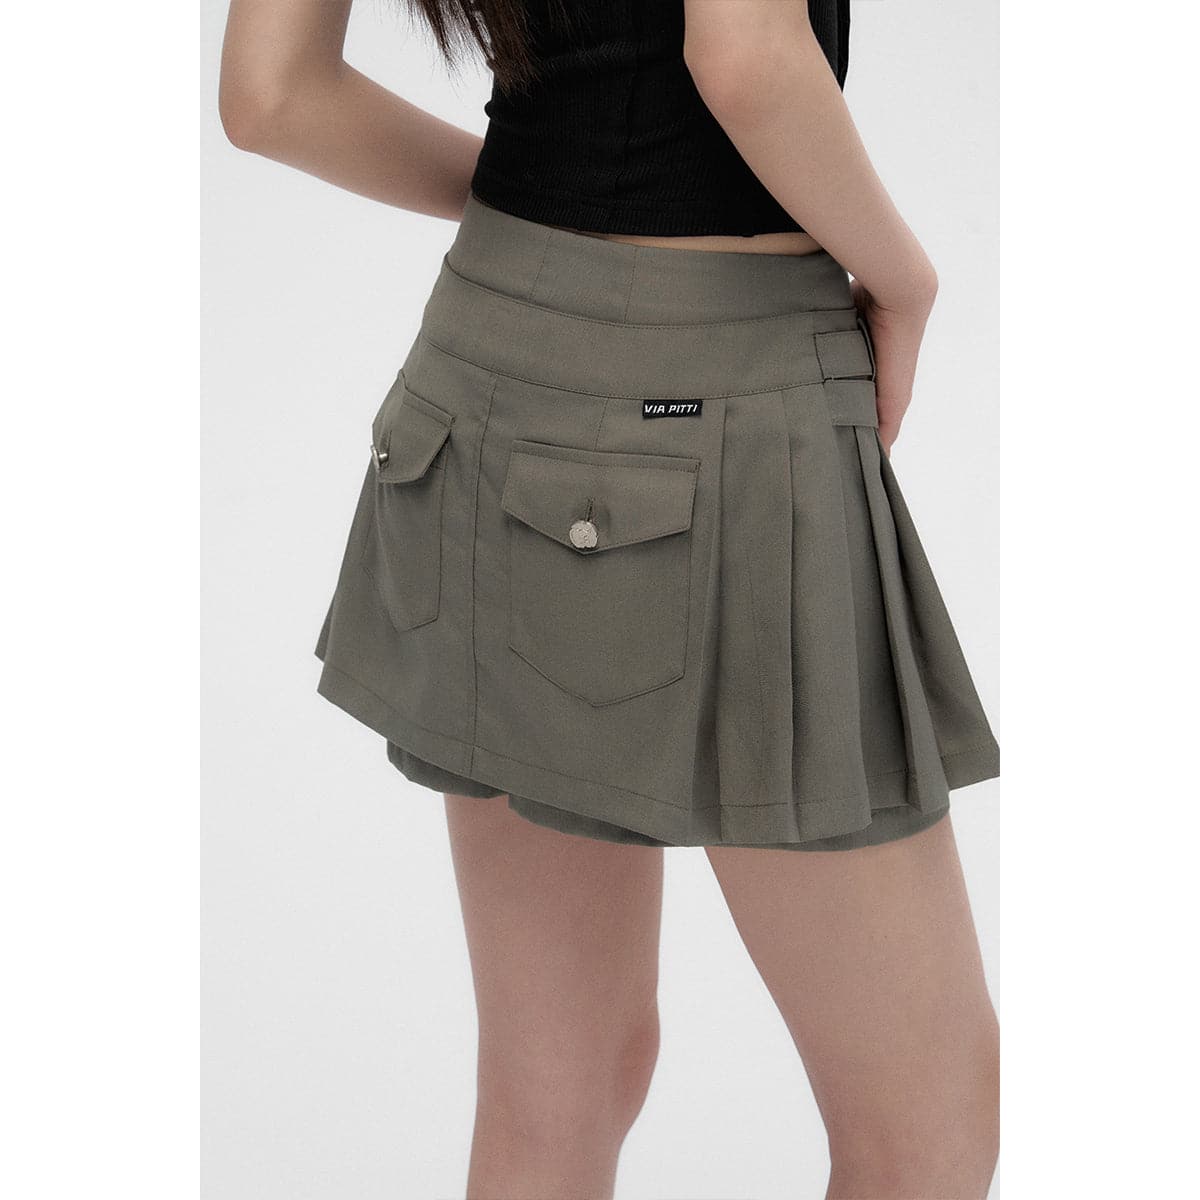 Double-Waist Green Shorts - Authentic Two-Piece Design - chiclara